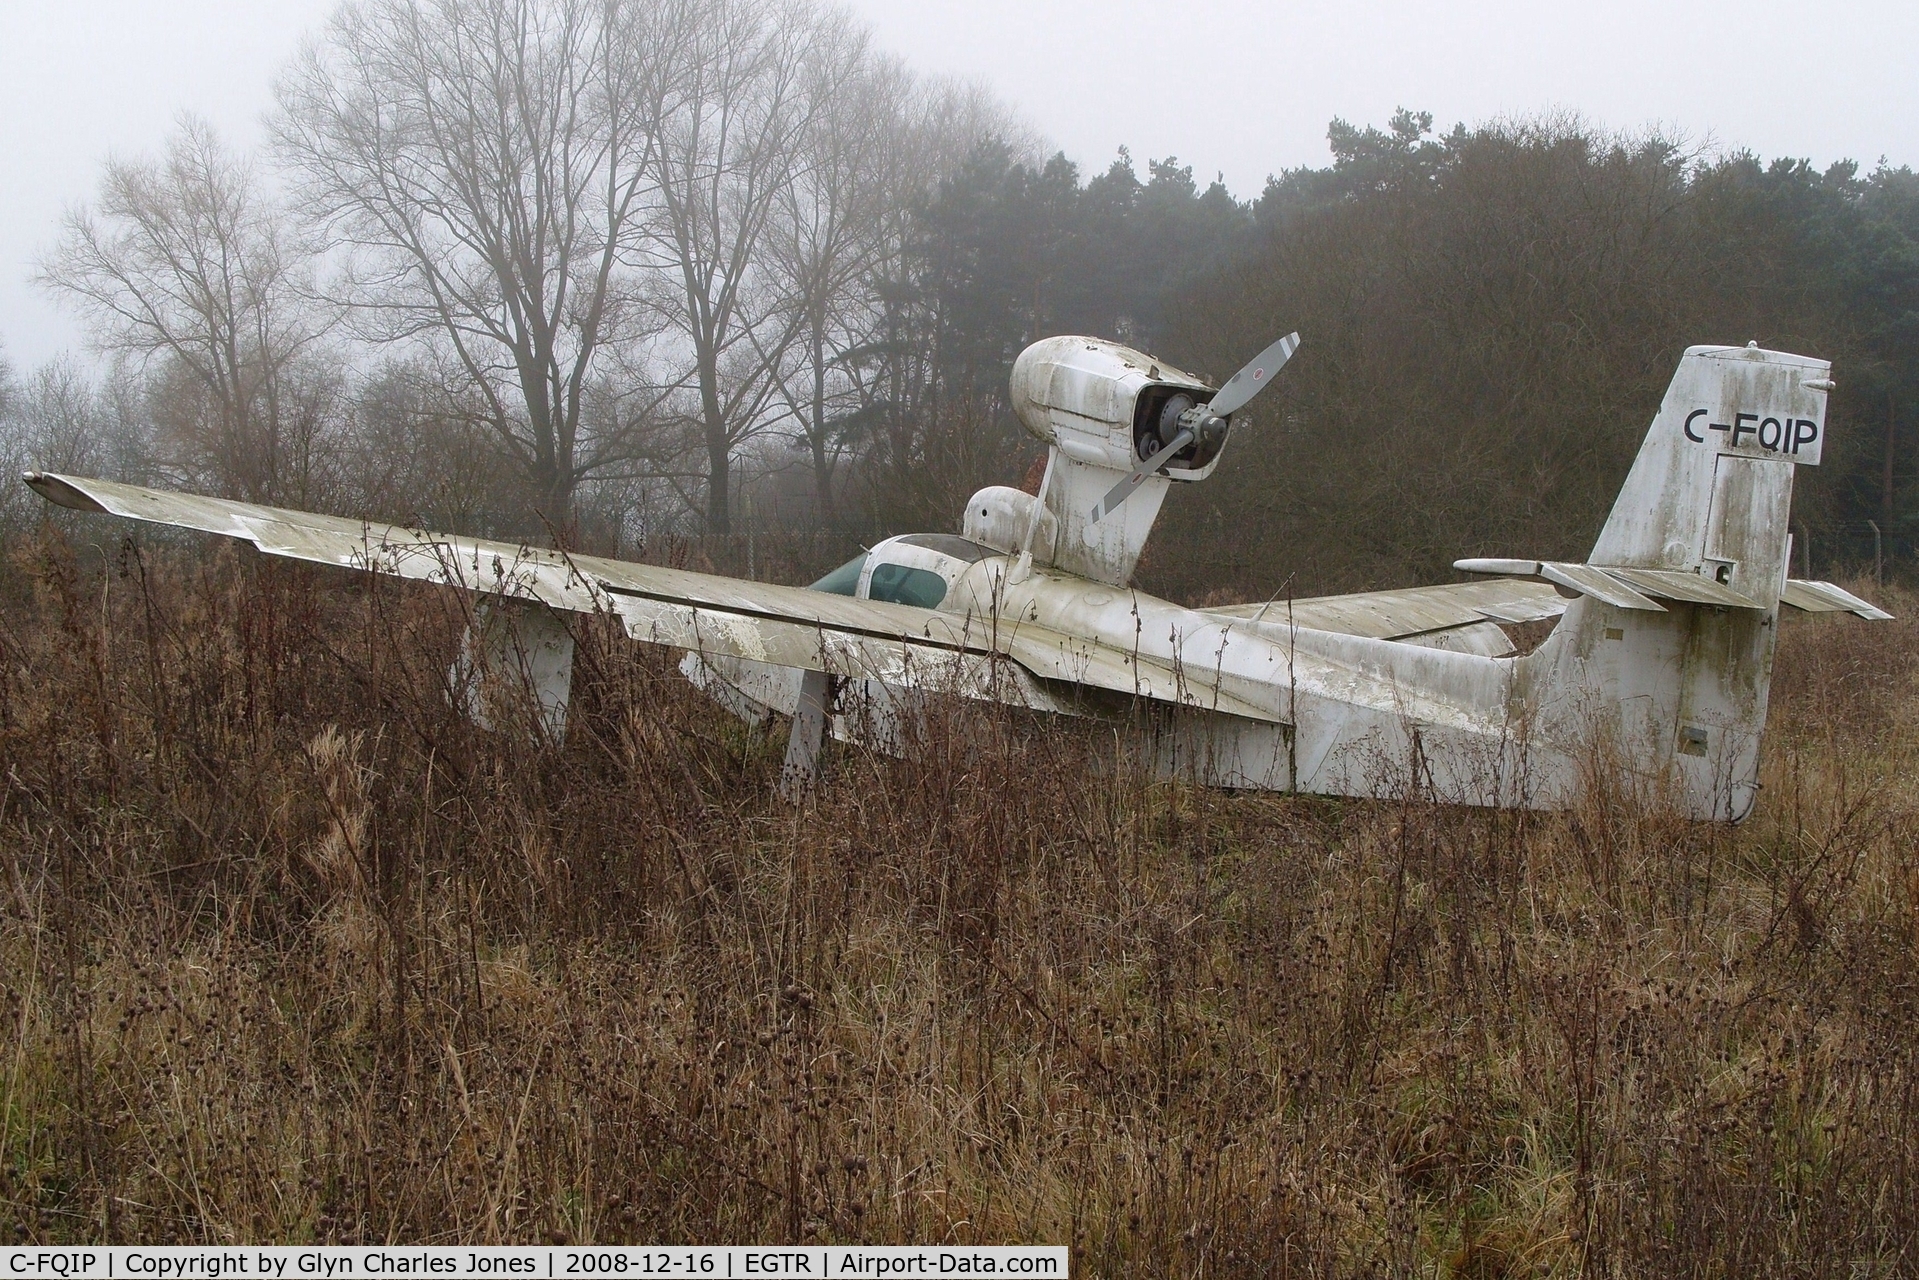 C-FQIP, 1975 Lake LA-4-200 Buccaneer C/N 679, Taken on a quiet cold and foggy day. Sadly looking rather shabby after being exposed to the elements for a very long period of time and is gradually being engulfed by the plant life around it.